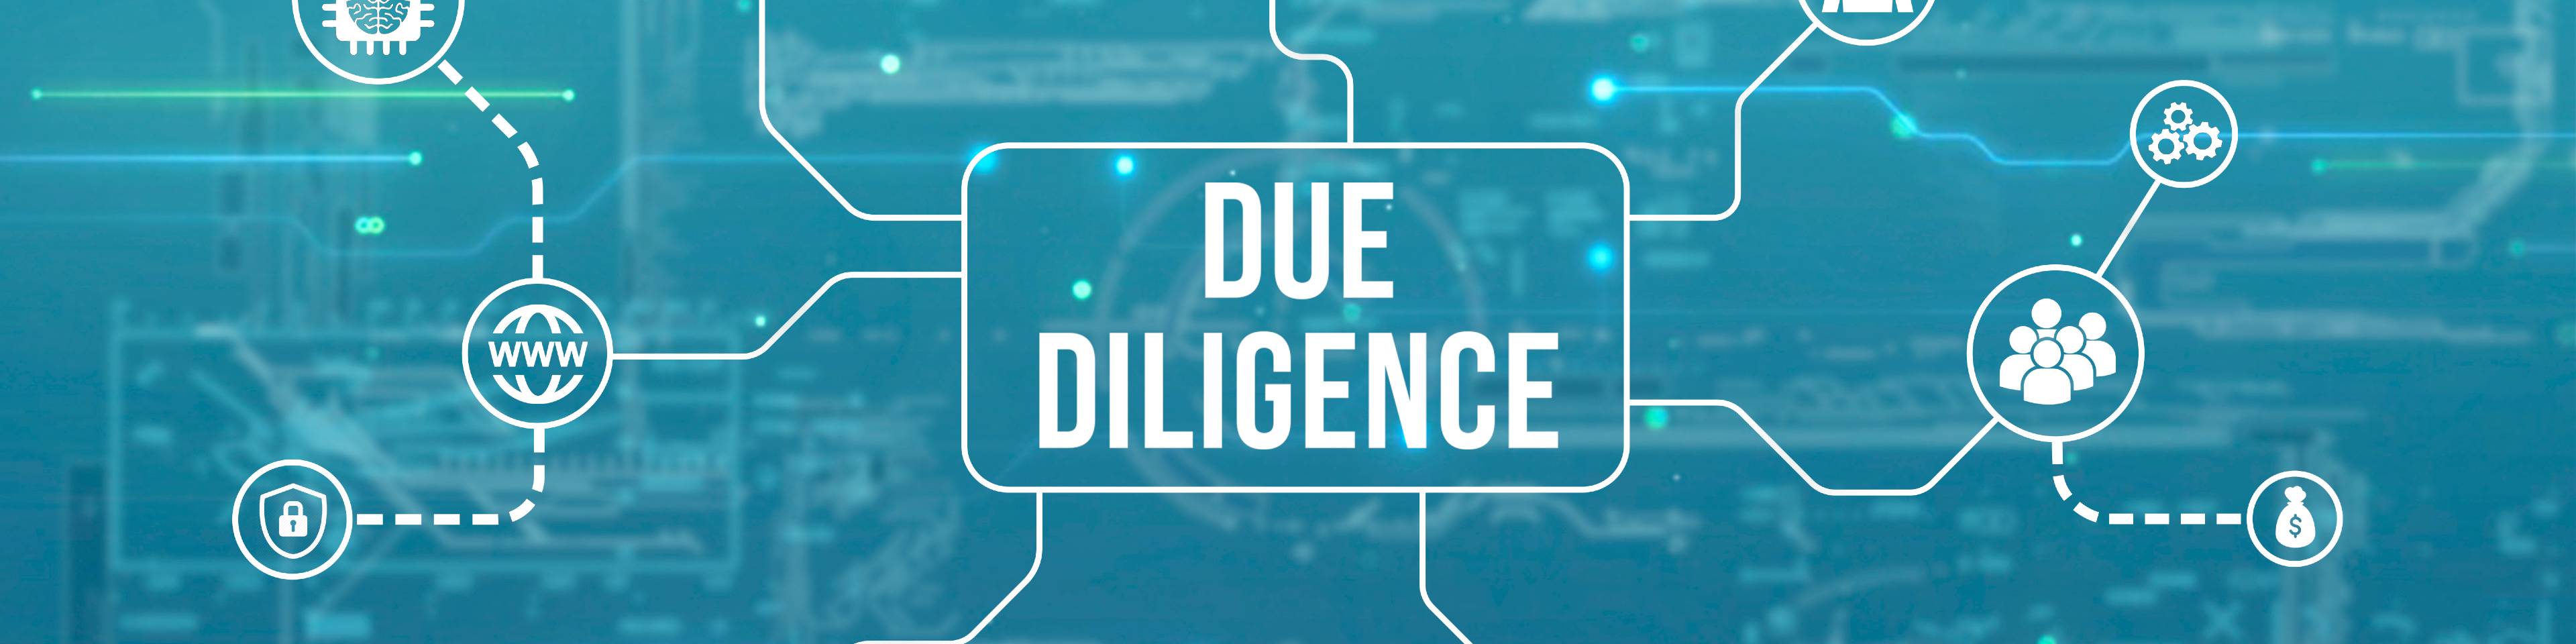 Wolters Kluwer launches due diligence resource checklist for corporate counsel to mitigate financial risk